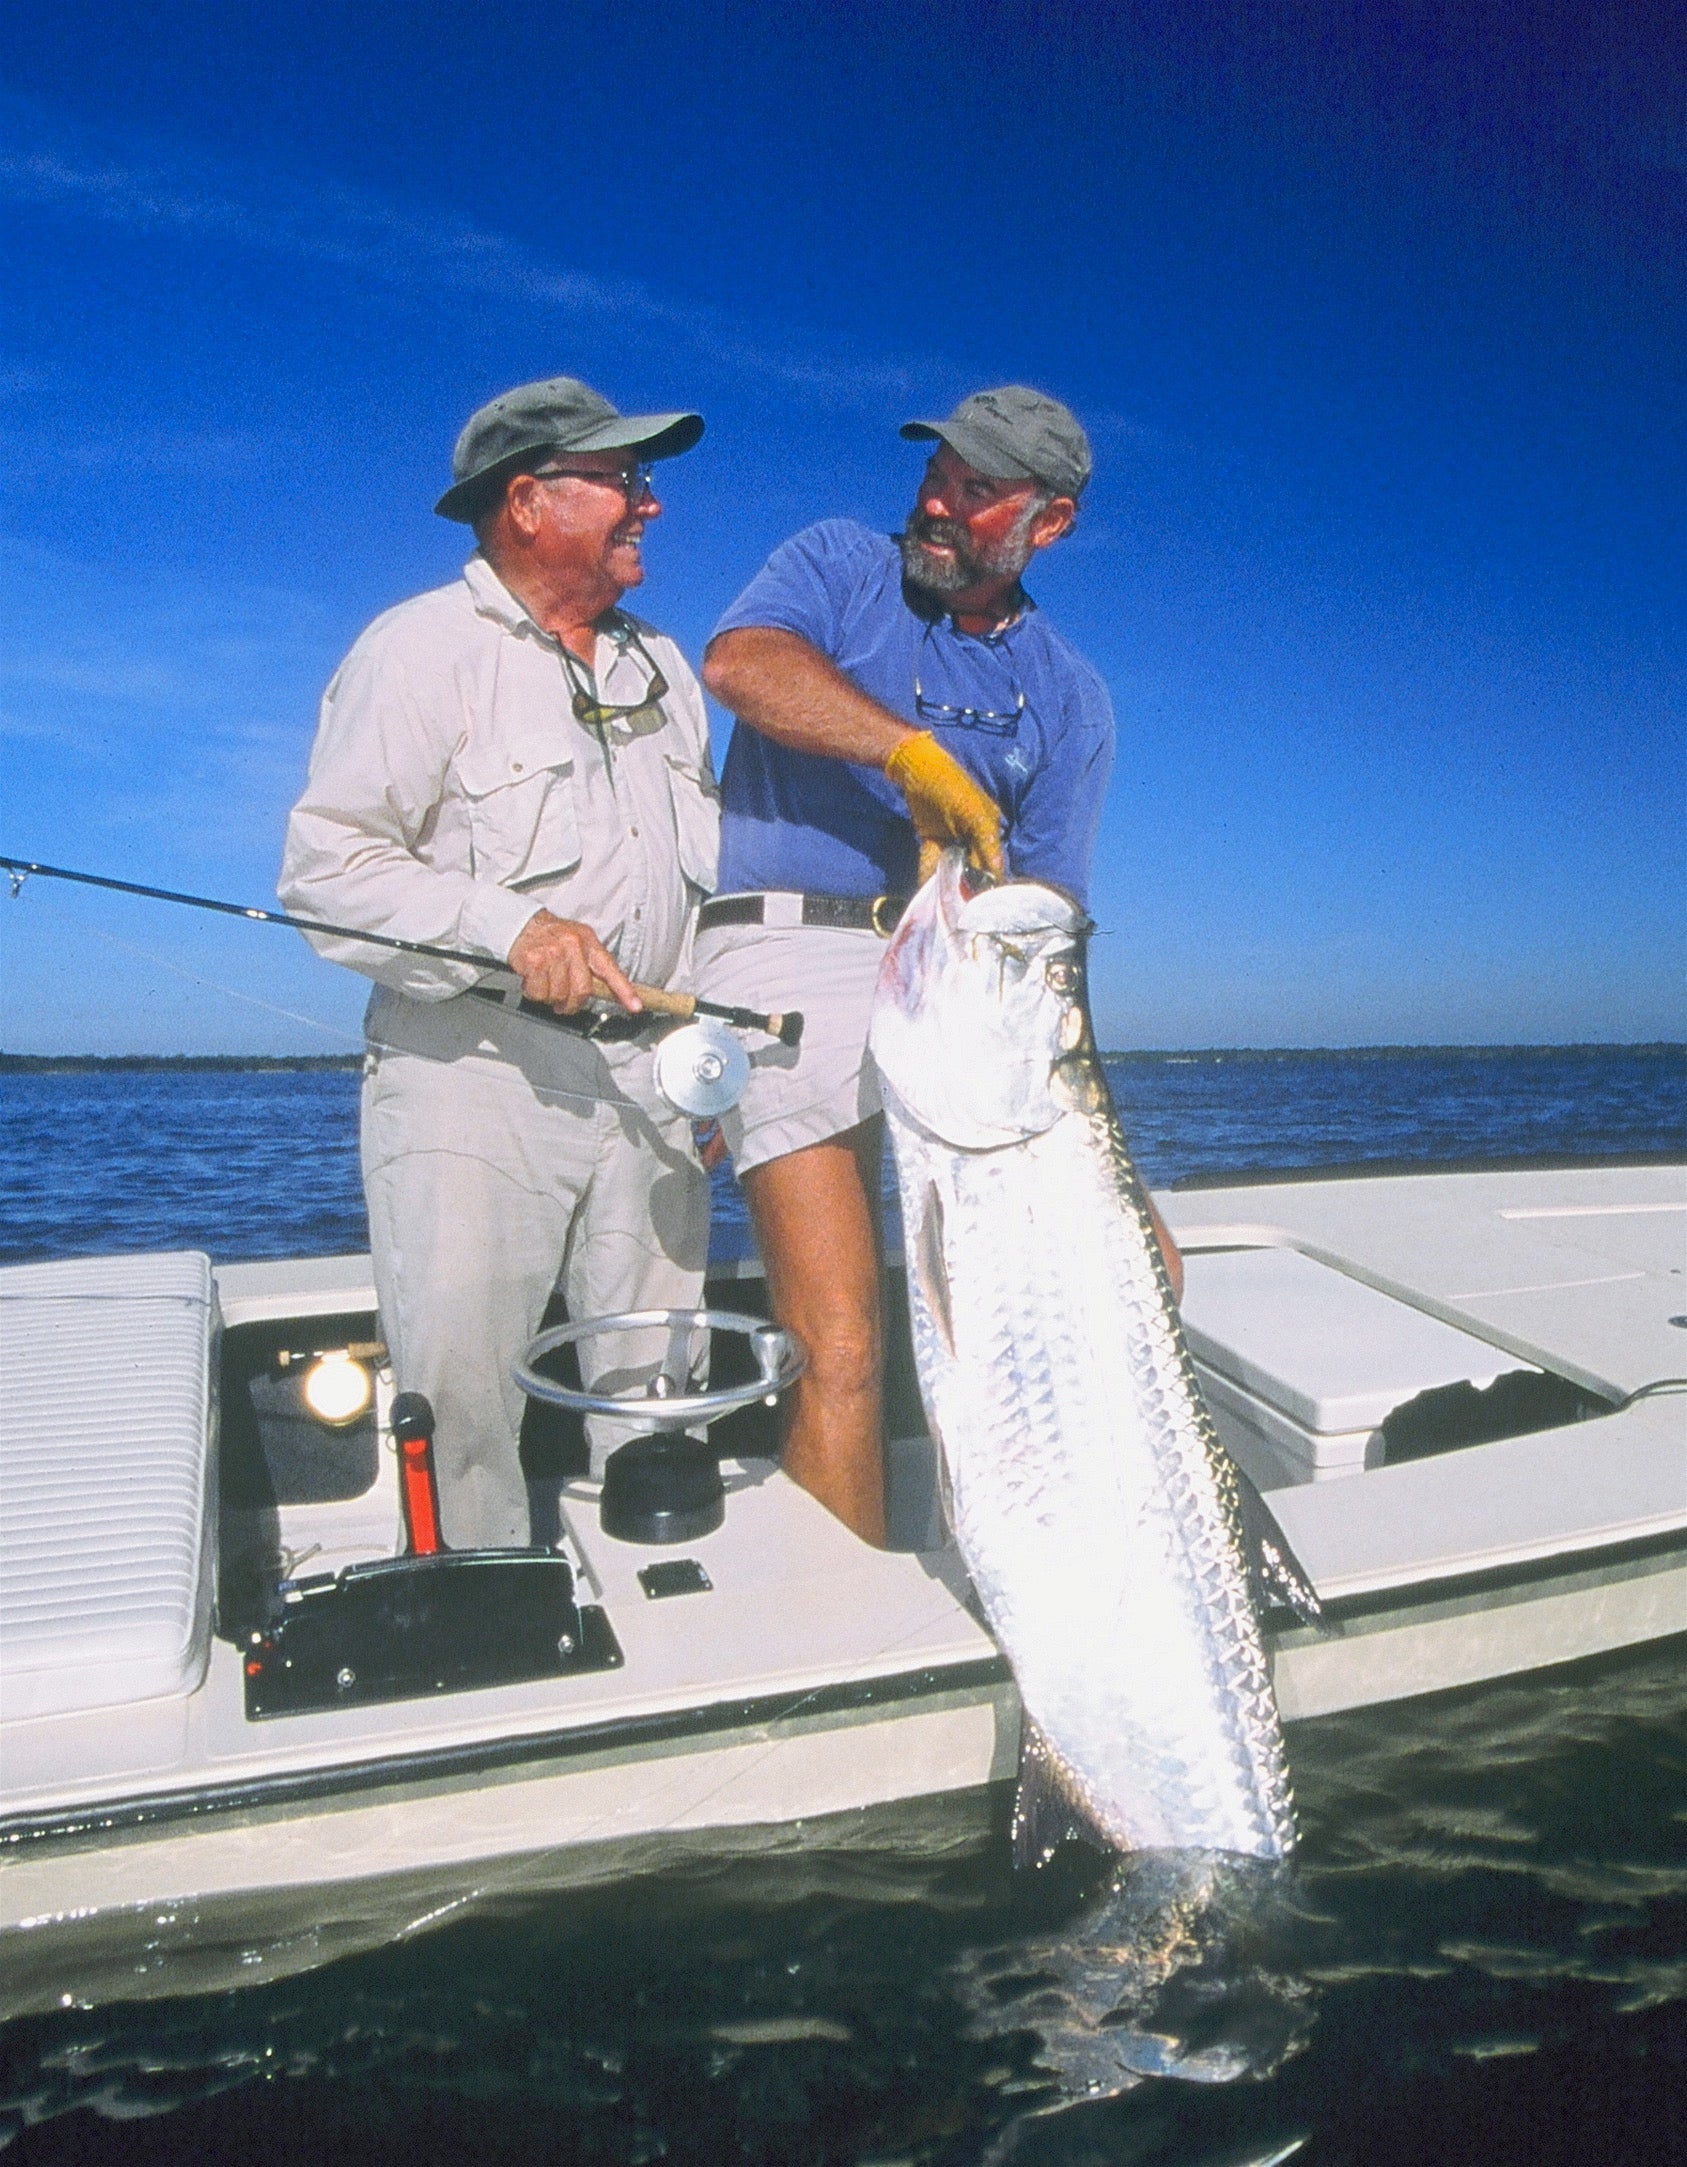 Flip Pallot and Lefty Kreh standing on a boat, while Flip is holding onto a large tarpon